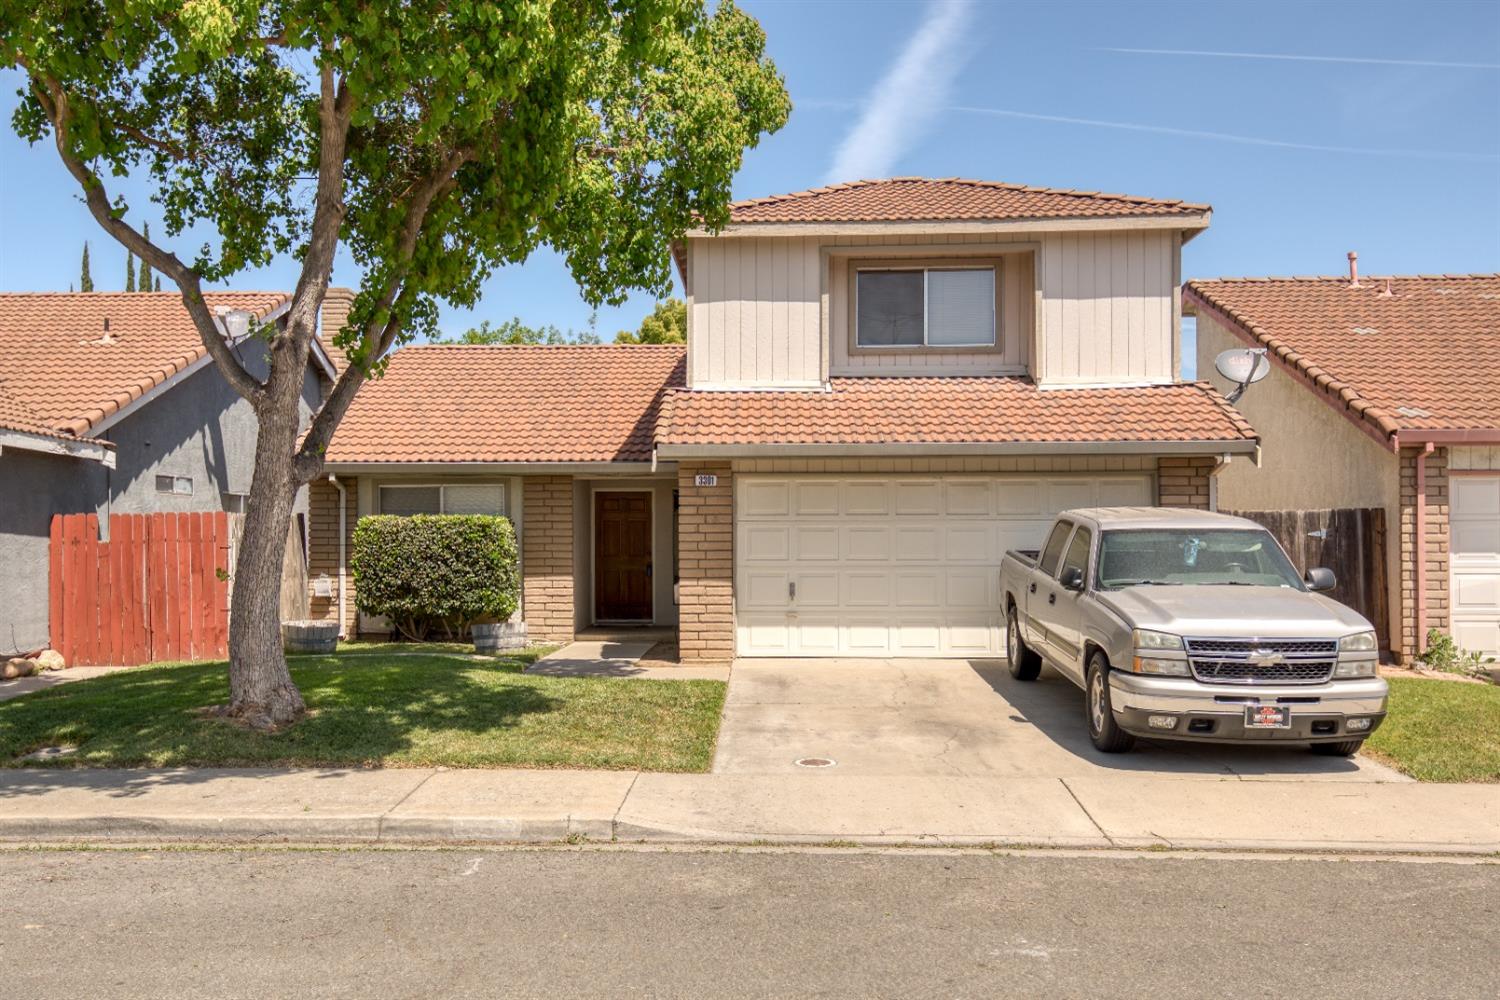 Photo of 3301 Suffolk Dr in Ceres, CA